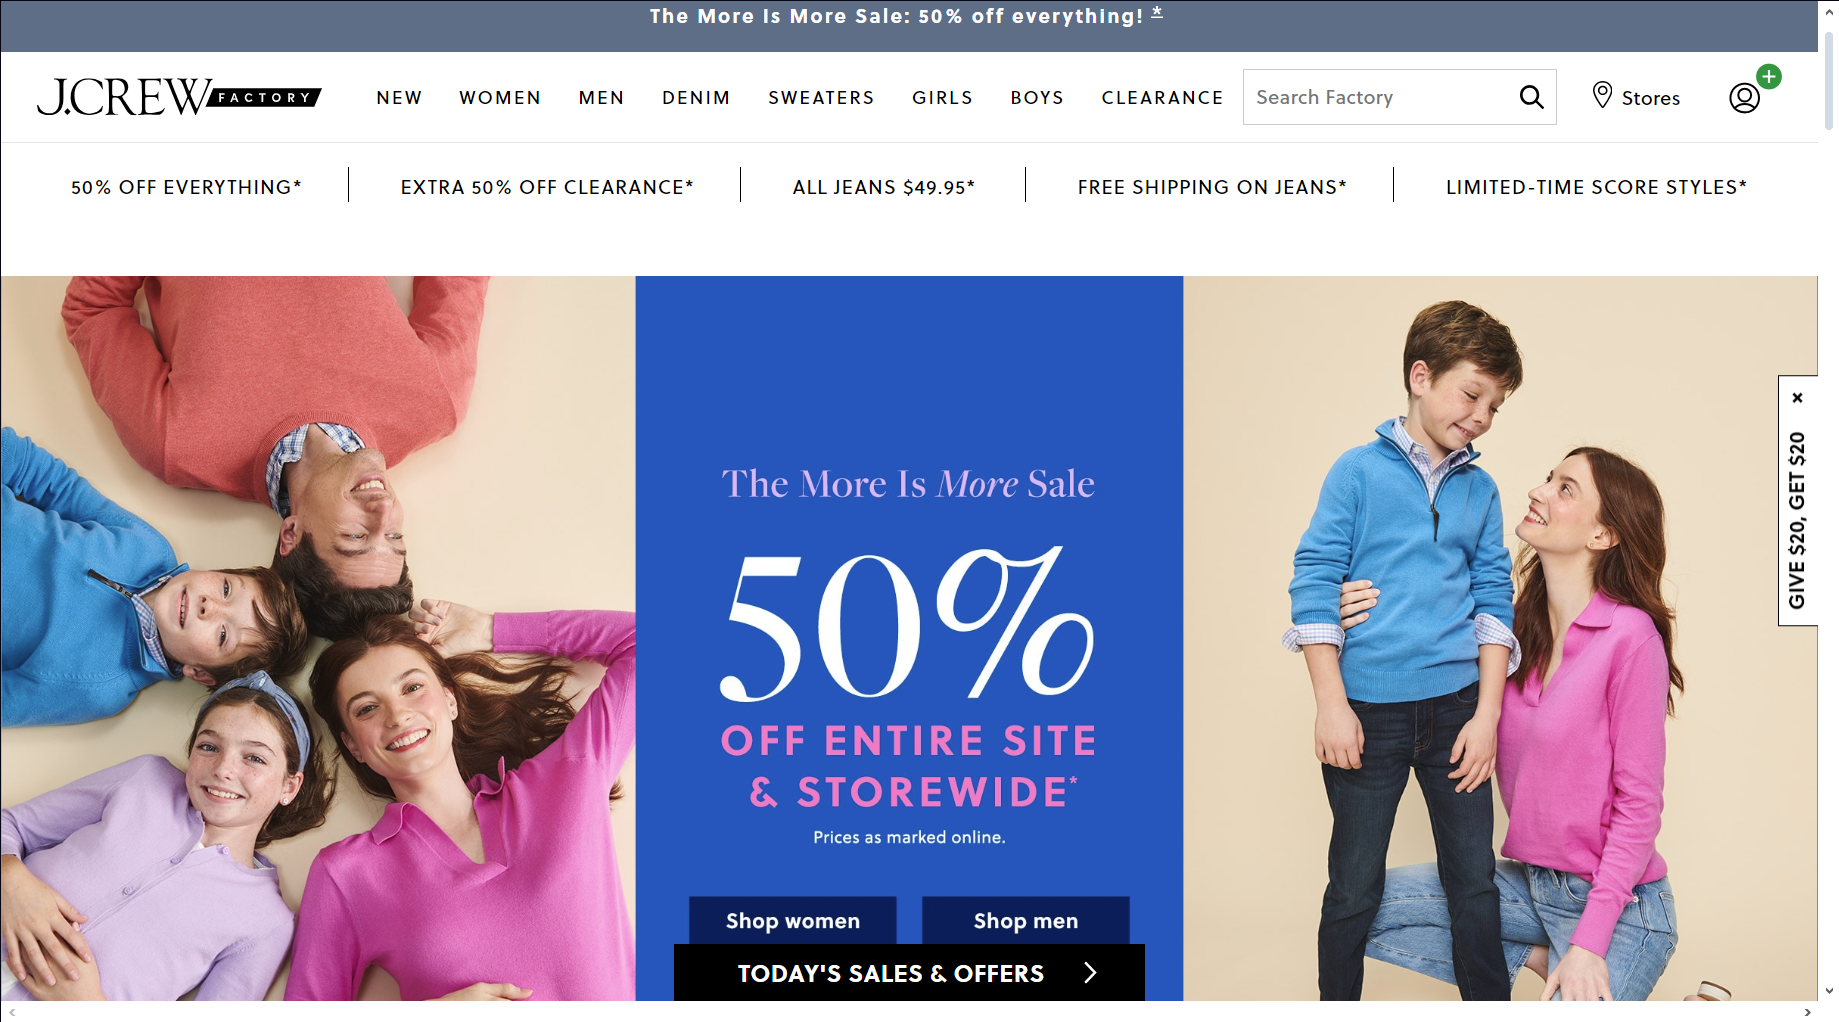 Visit J. Crew Factory for Awesome Valentine’s Day Deals